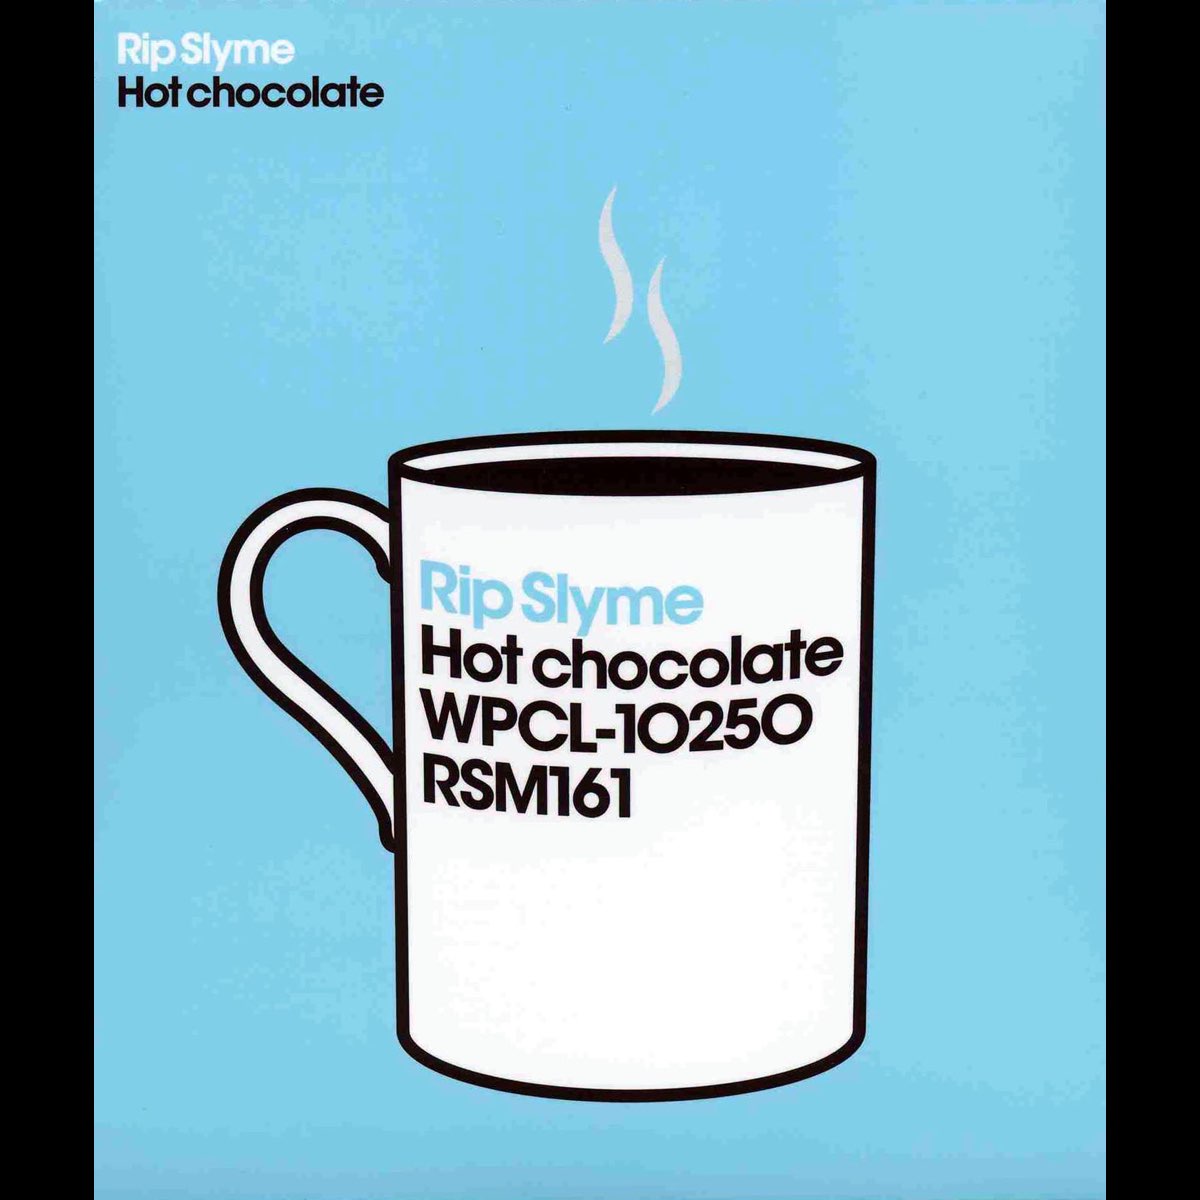 Hot Chocolate - EP by RIP SLYME.